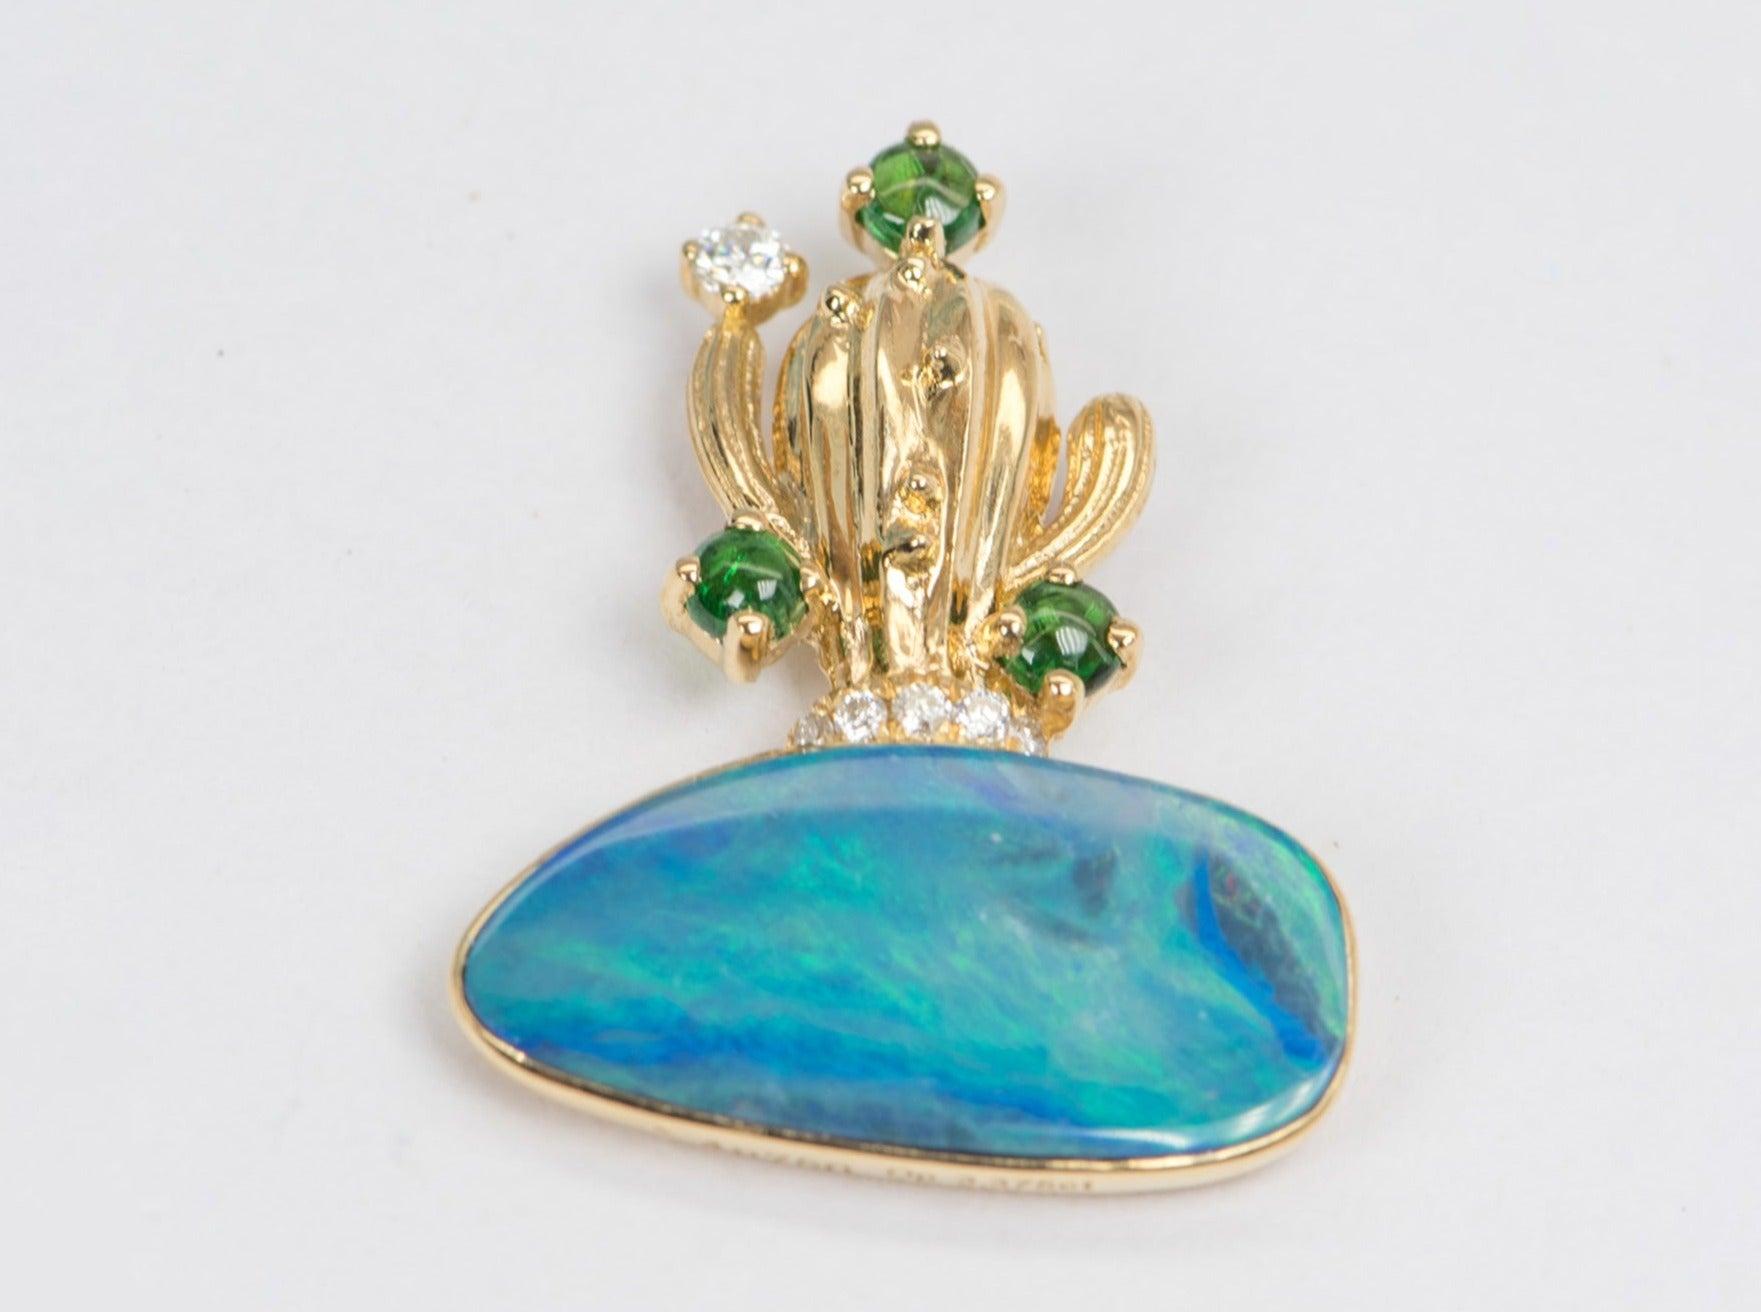 ♥ Solid 18k yellow gold cactus pendant set with a beautiful doublet Australian Opal, moissanites, and tsavorites
♥ Gorgeous blue color!
♥ The item measures 24.7 mm in length, 19.1 mm in width, and is 5.6 mm thick

♥ Gemstone: Opal, 3.37t;